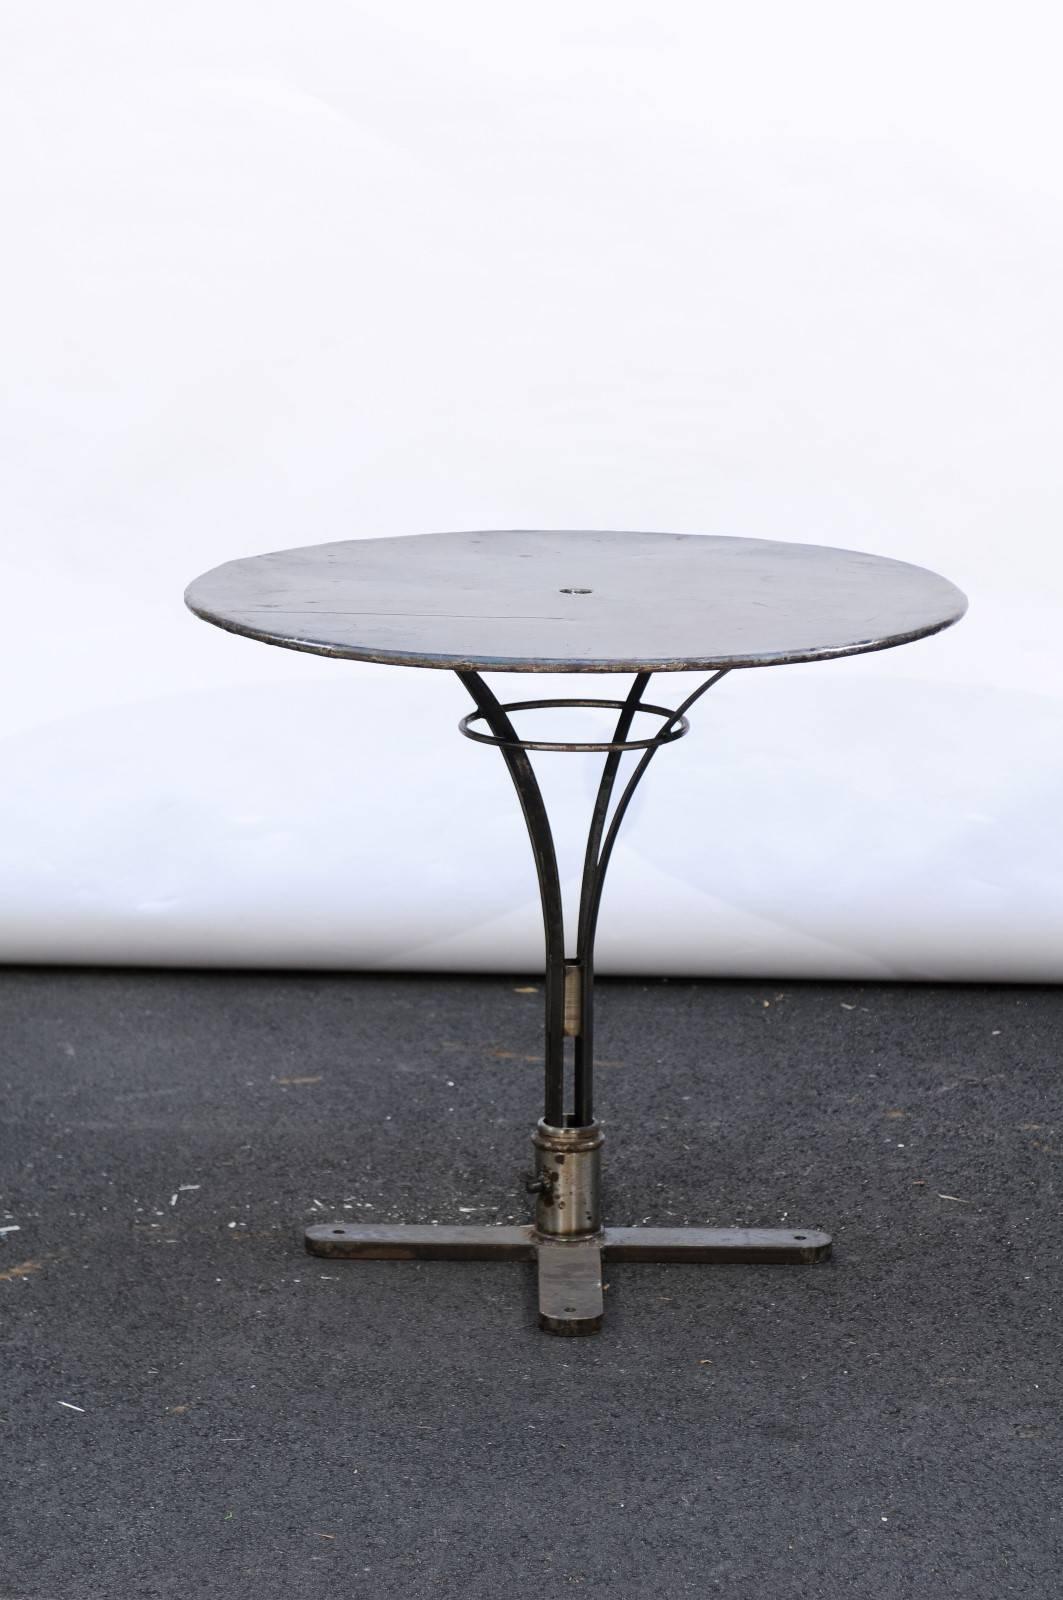 A French 20th century round iron bistrot table with pedestal base. Originally blue, this French iron side table came from a restaurant in the Loire Valley and has since been completely scraped and peeled down to reveal a beautiful brown exterior.